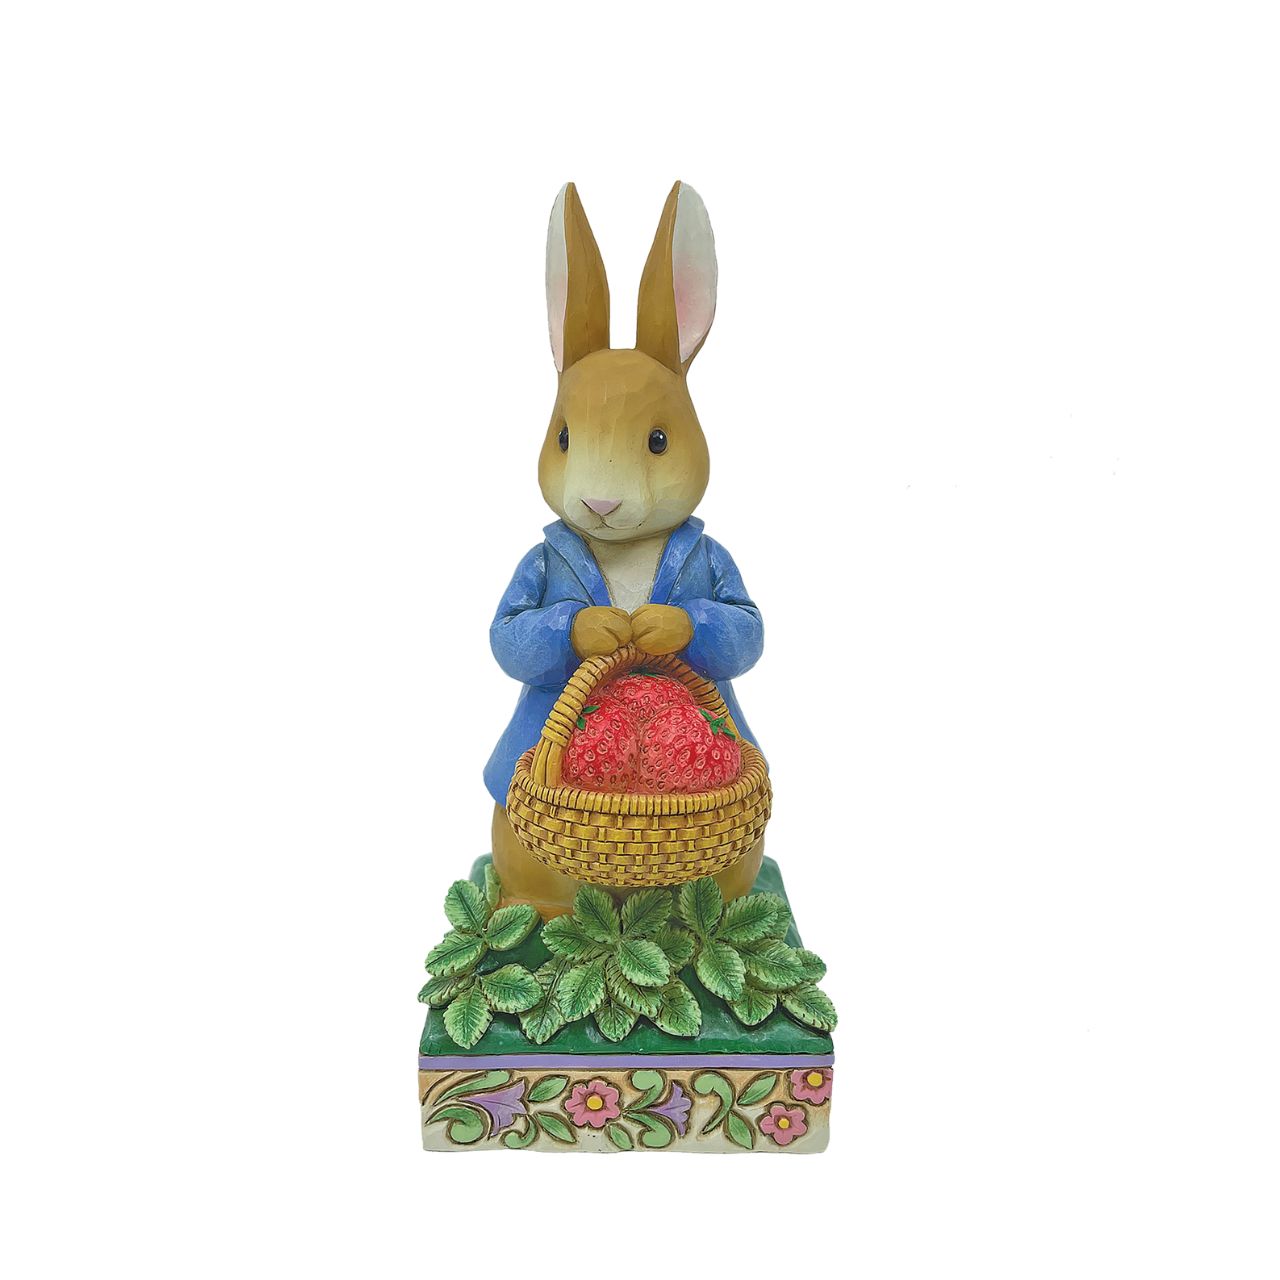 Beatrix Potter Peter Rabbit with Basket of Strawberries Figurine  Peter Rabbit with Basket of Strawberries Figurine Made from cast stone. Packed in a branded gift box. Unique variations should be expected as this product is hand painted. Not a toy or children's product.